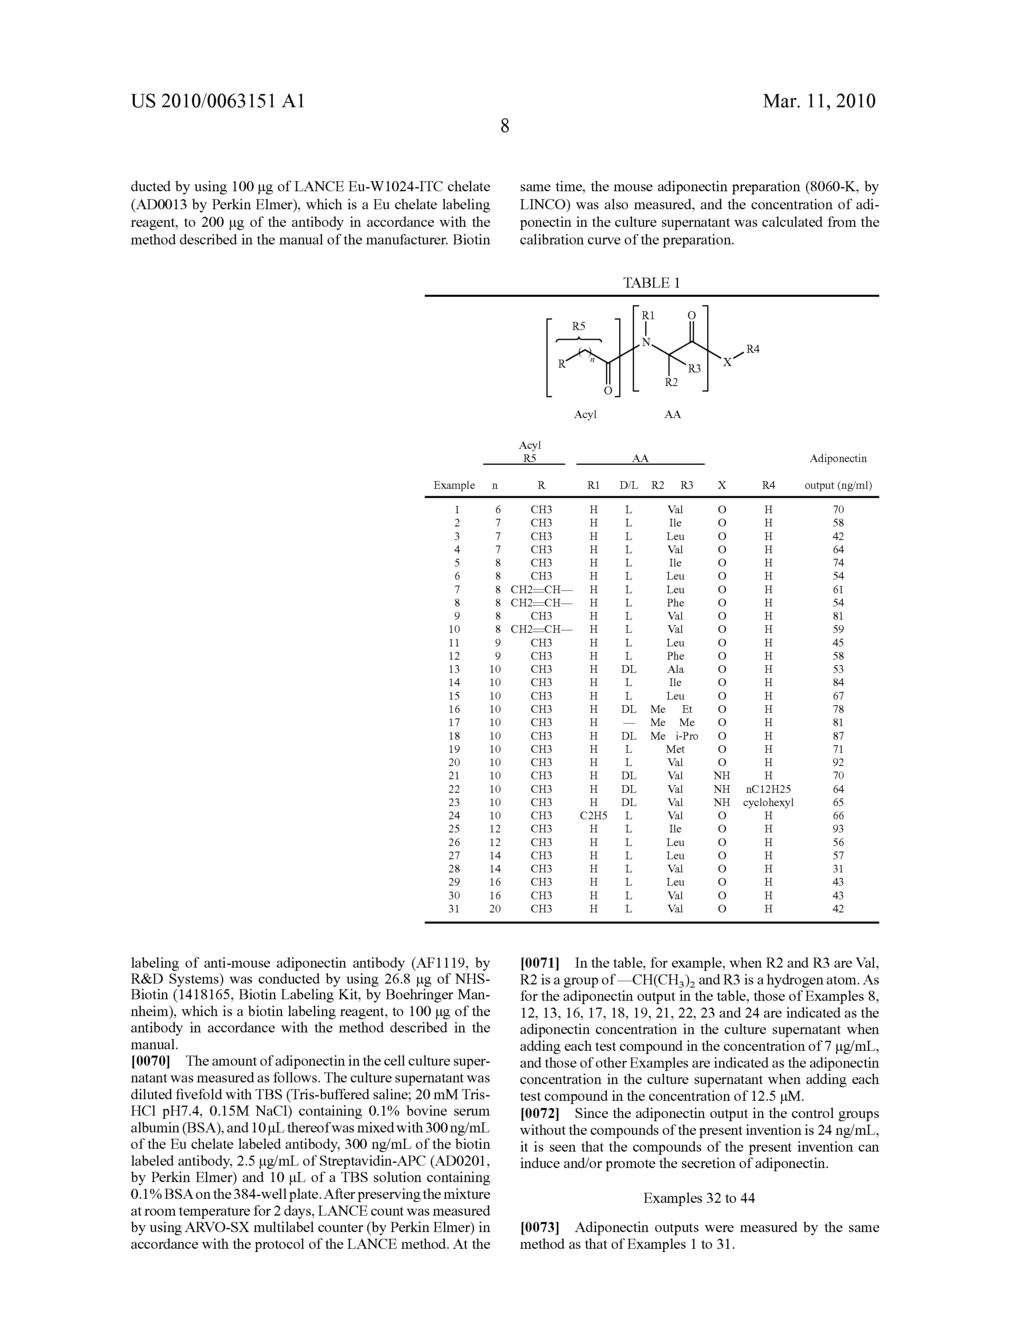 ACYLAMIDE COMPOUNDS HAVING SECRETAGOGUE OR INDUCER ACTIVITY OF ADIPONECTIN - diagram, schematic, and image 12